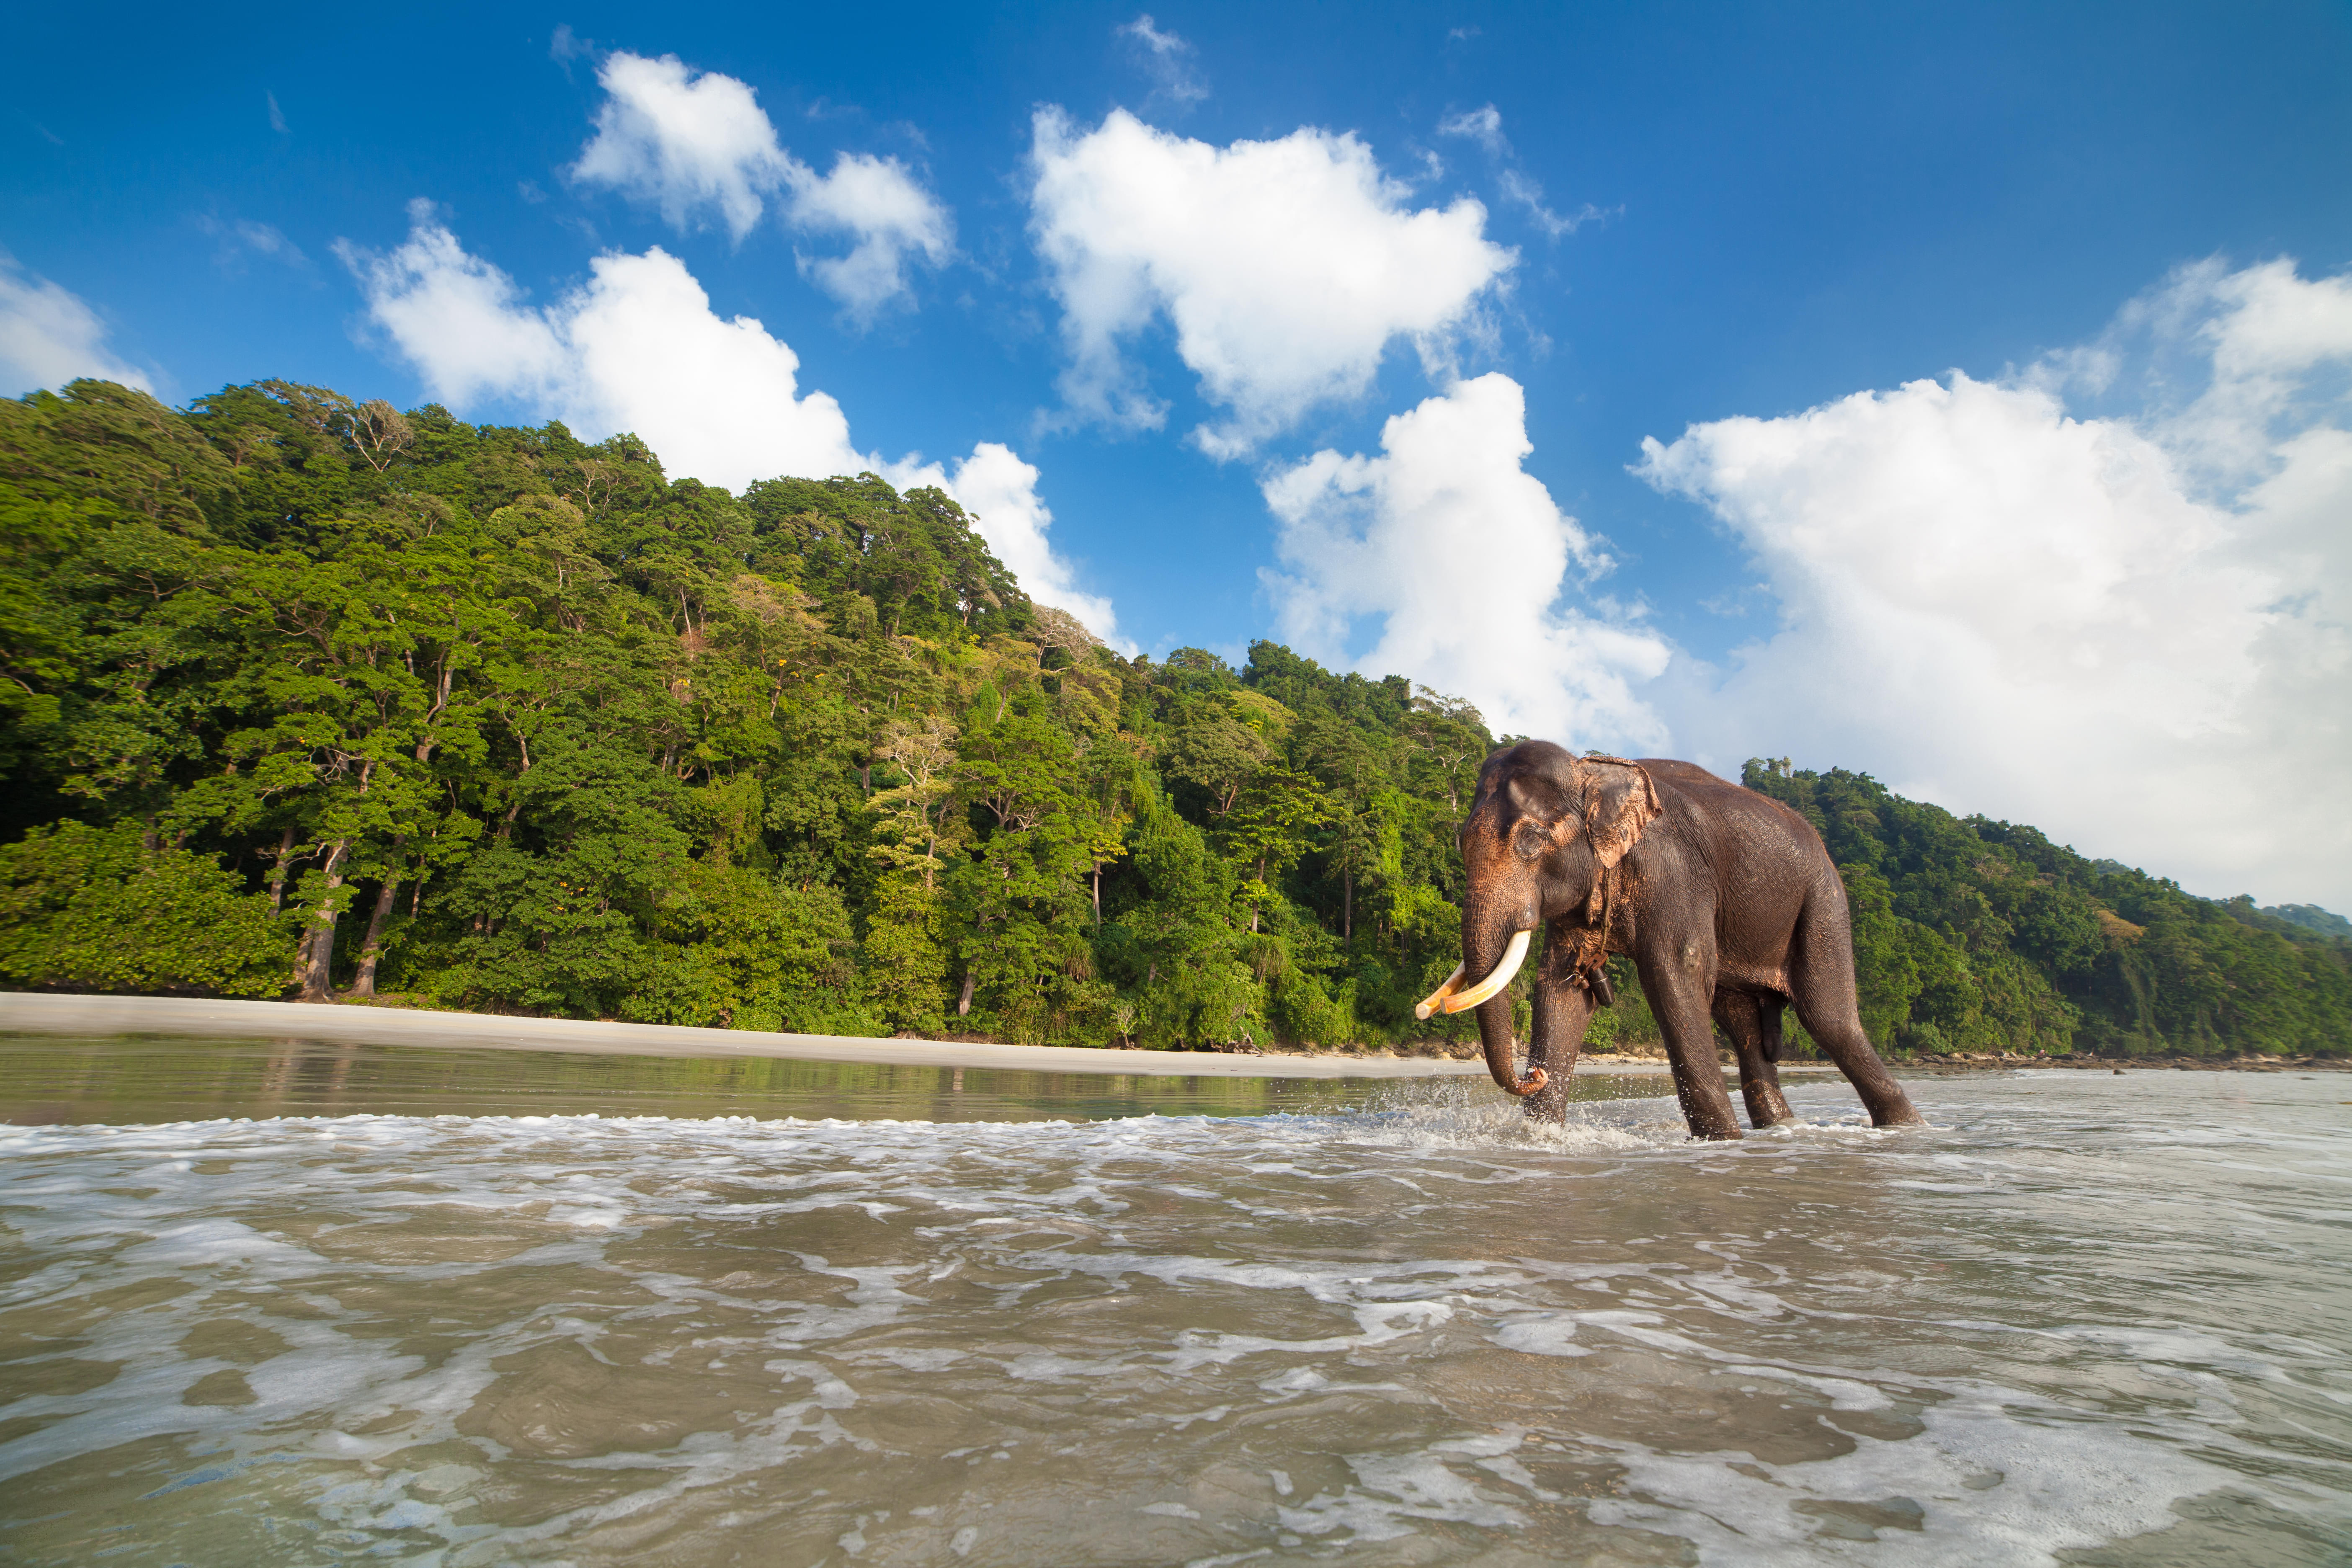 Things to Do in Havelock Island